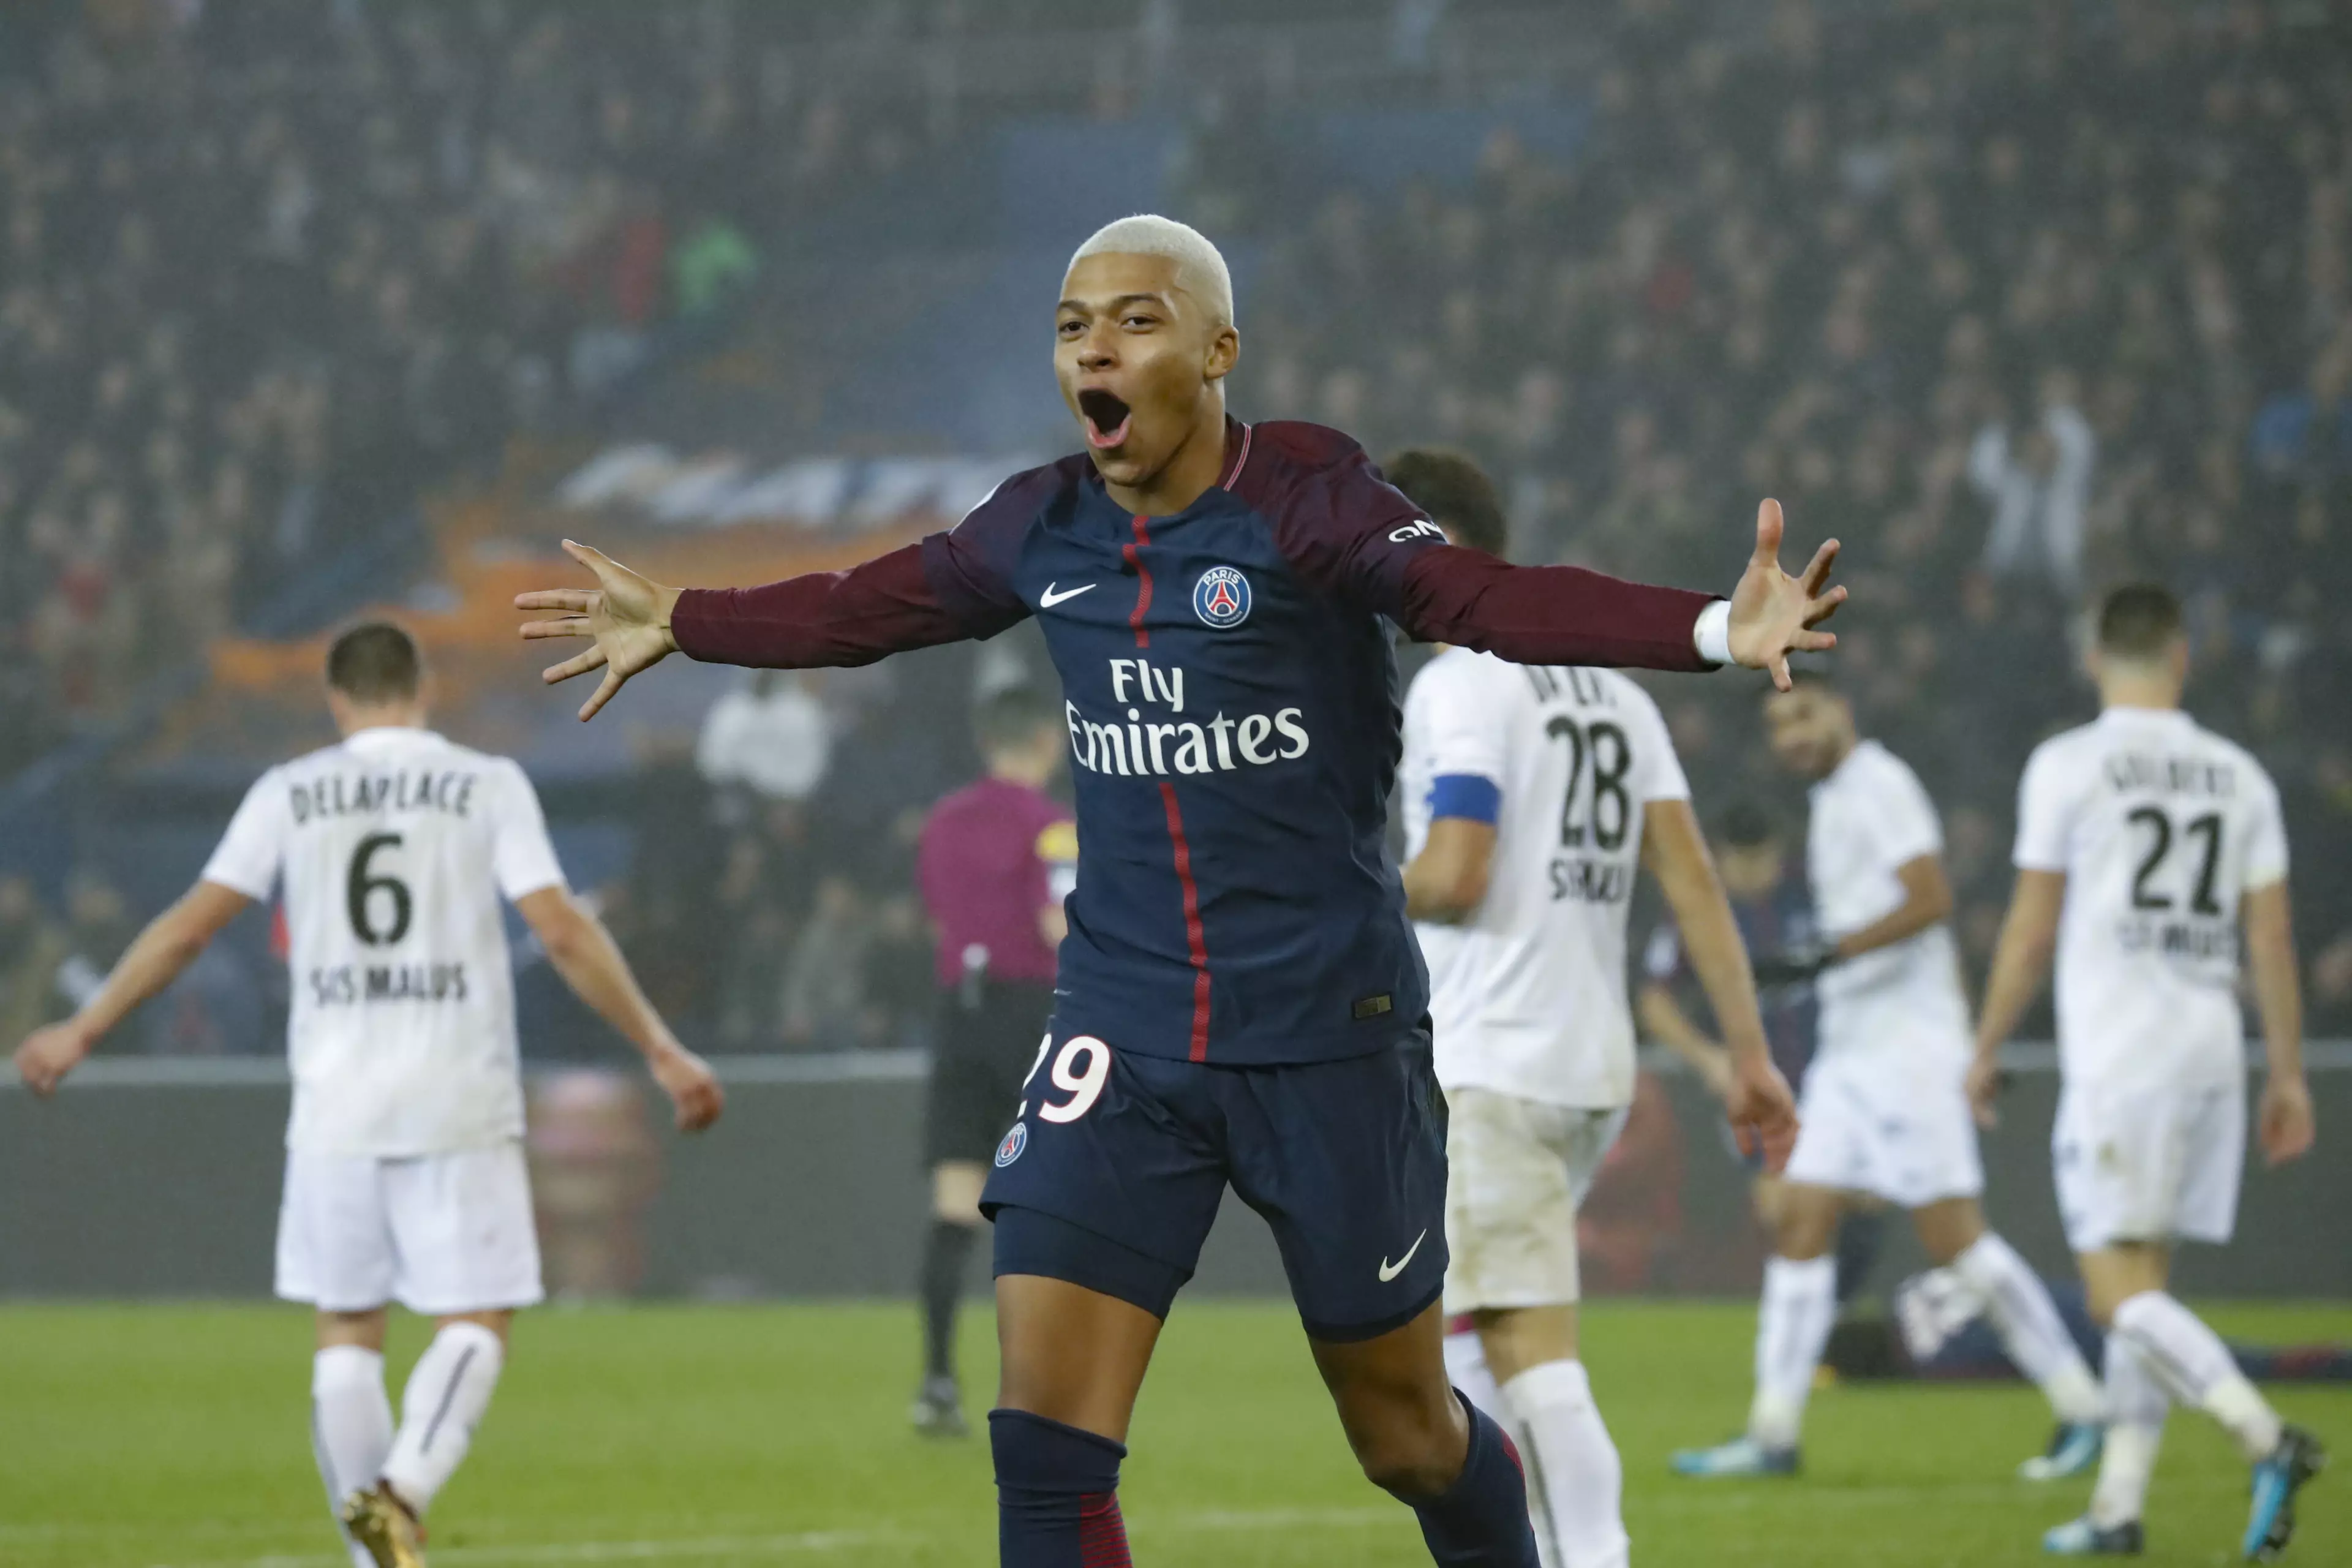 The Strange Clause In Mbappe's Contract That Means PSG Move Is Now Permanent